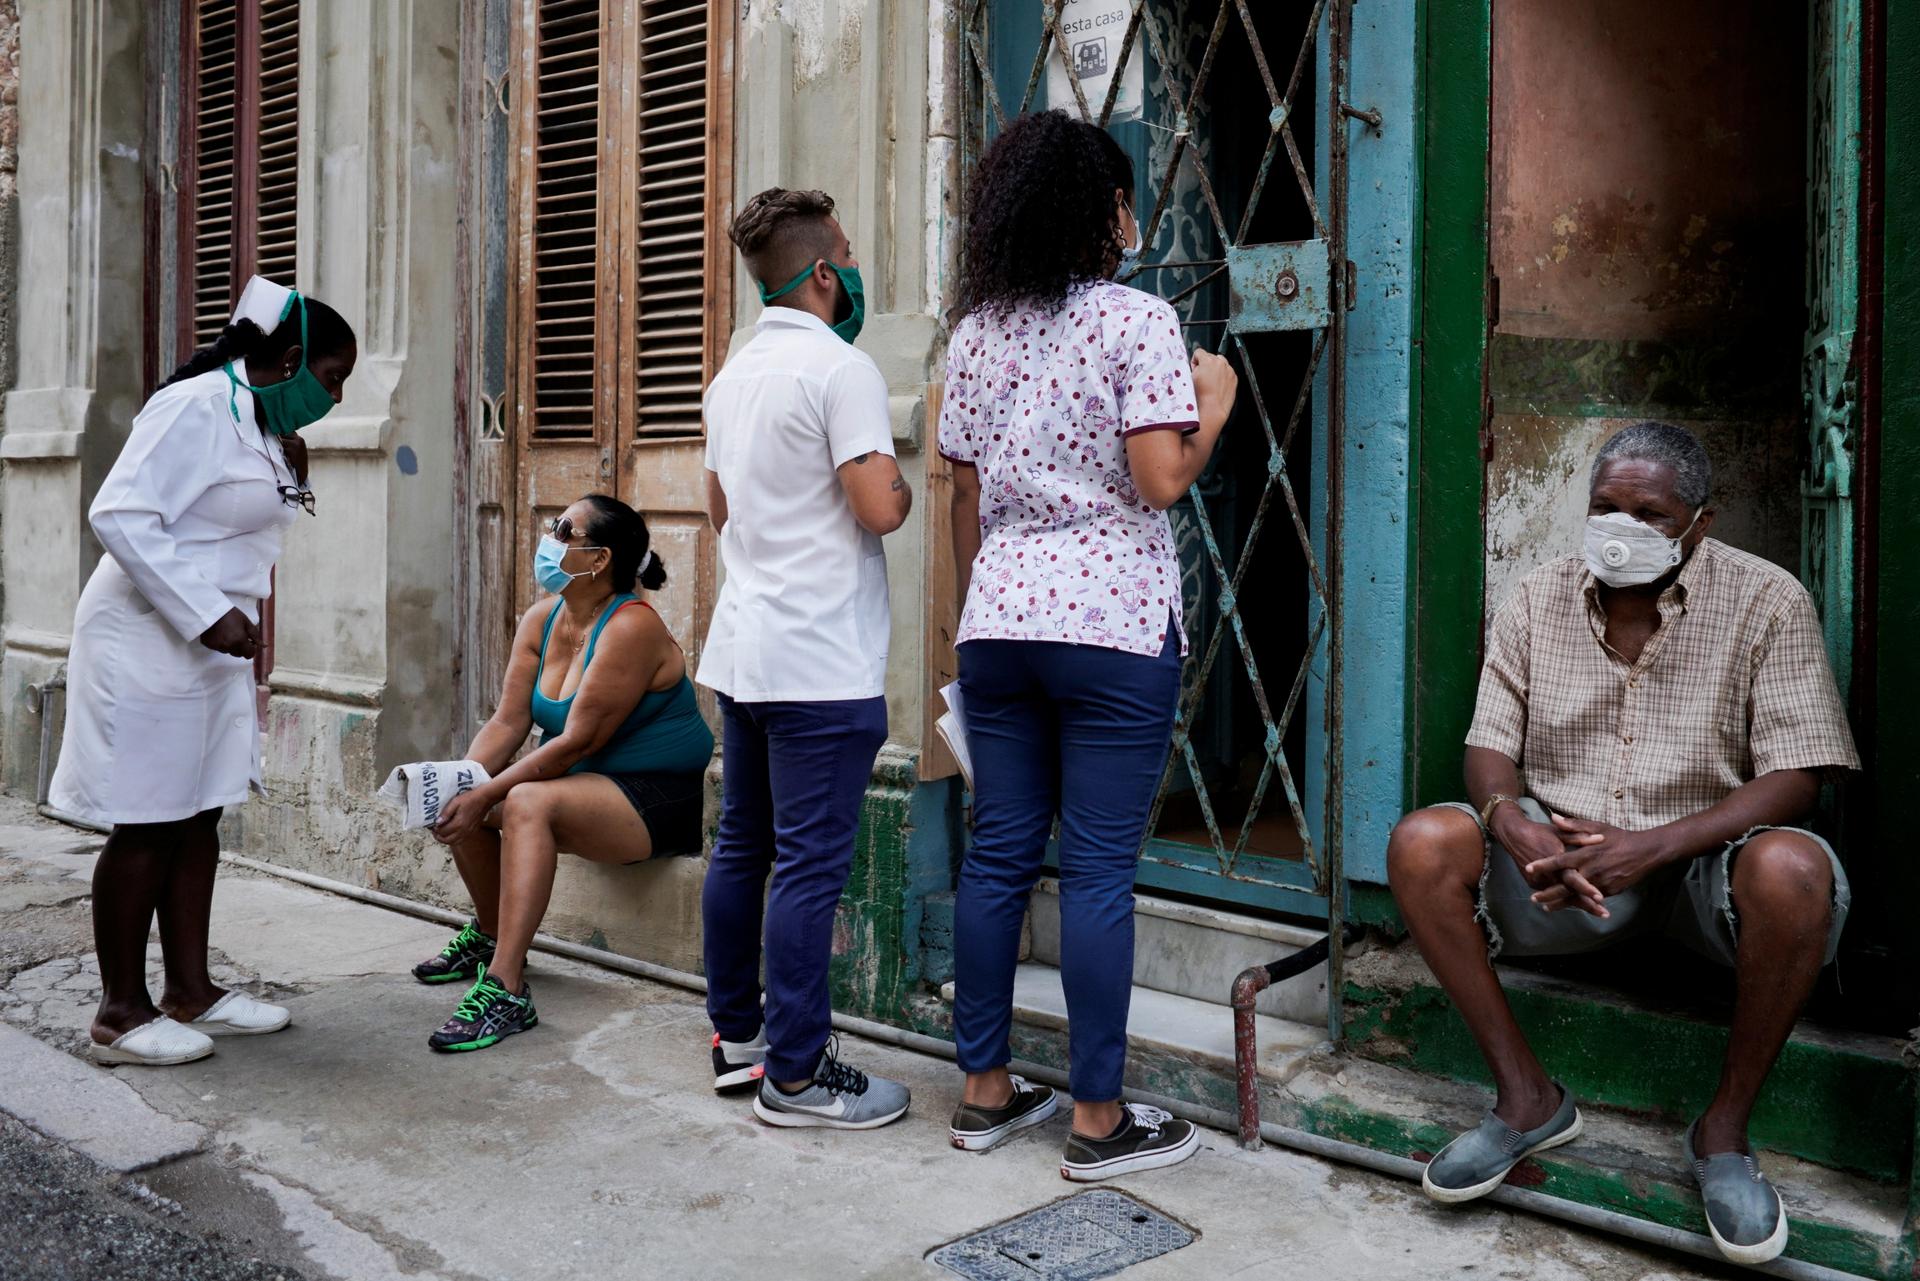 Medical students check door-to-door for people with symptoms amid concerns about the spread of the coronavirus disease (COVID-19), in downtown Havana, Cuba, May 11, 2020.